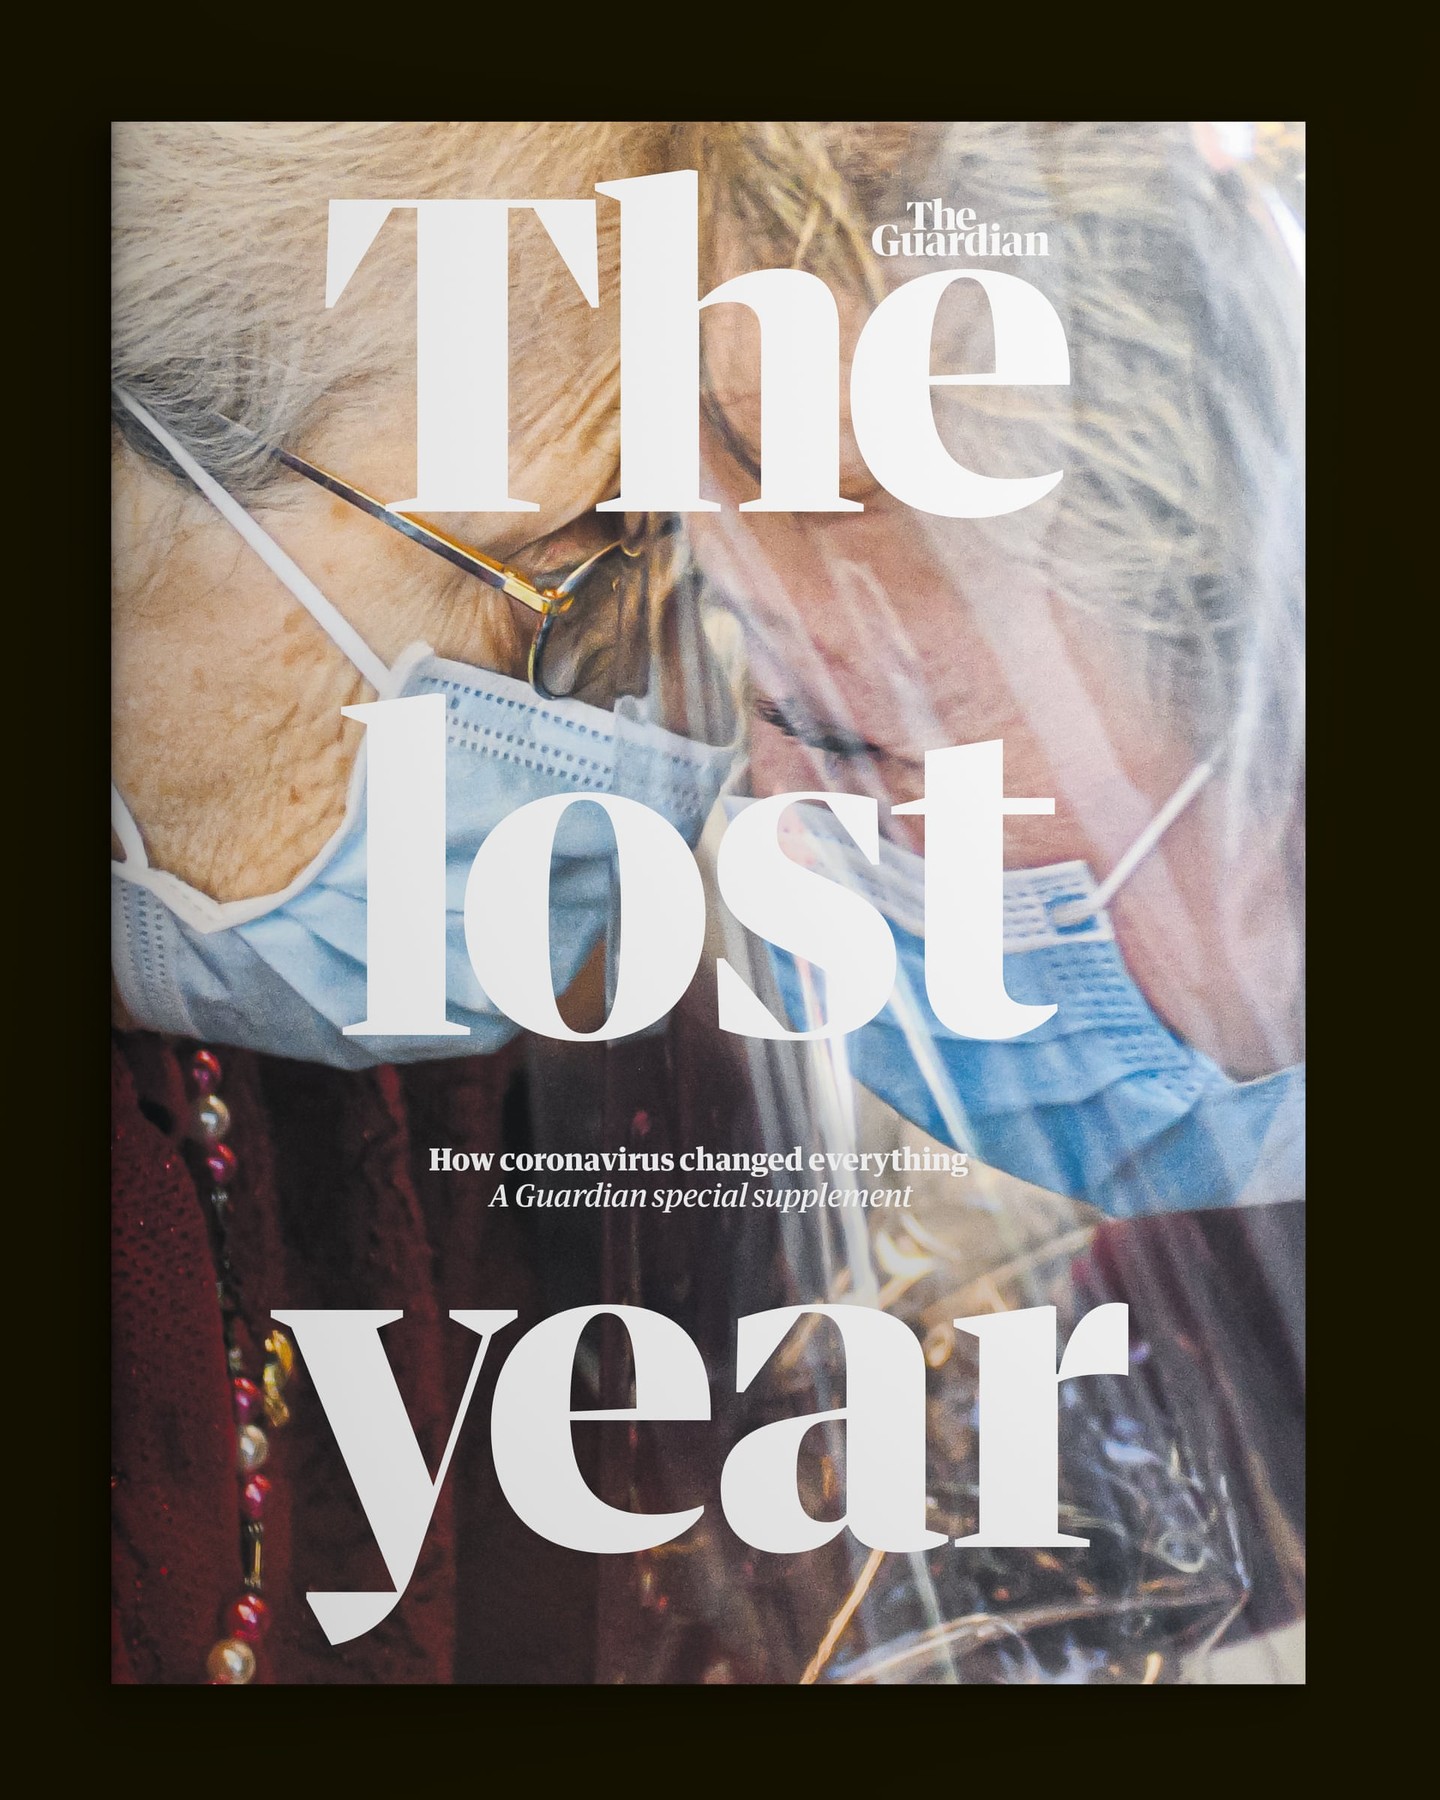 The lost year